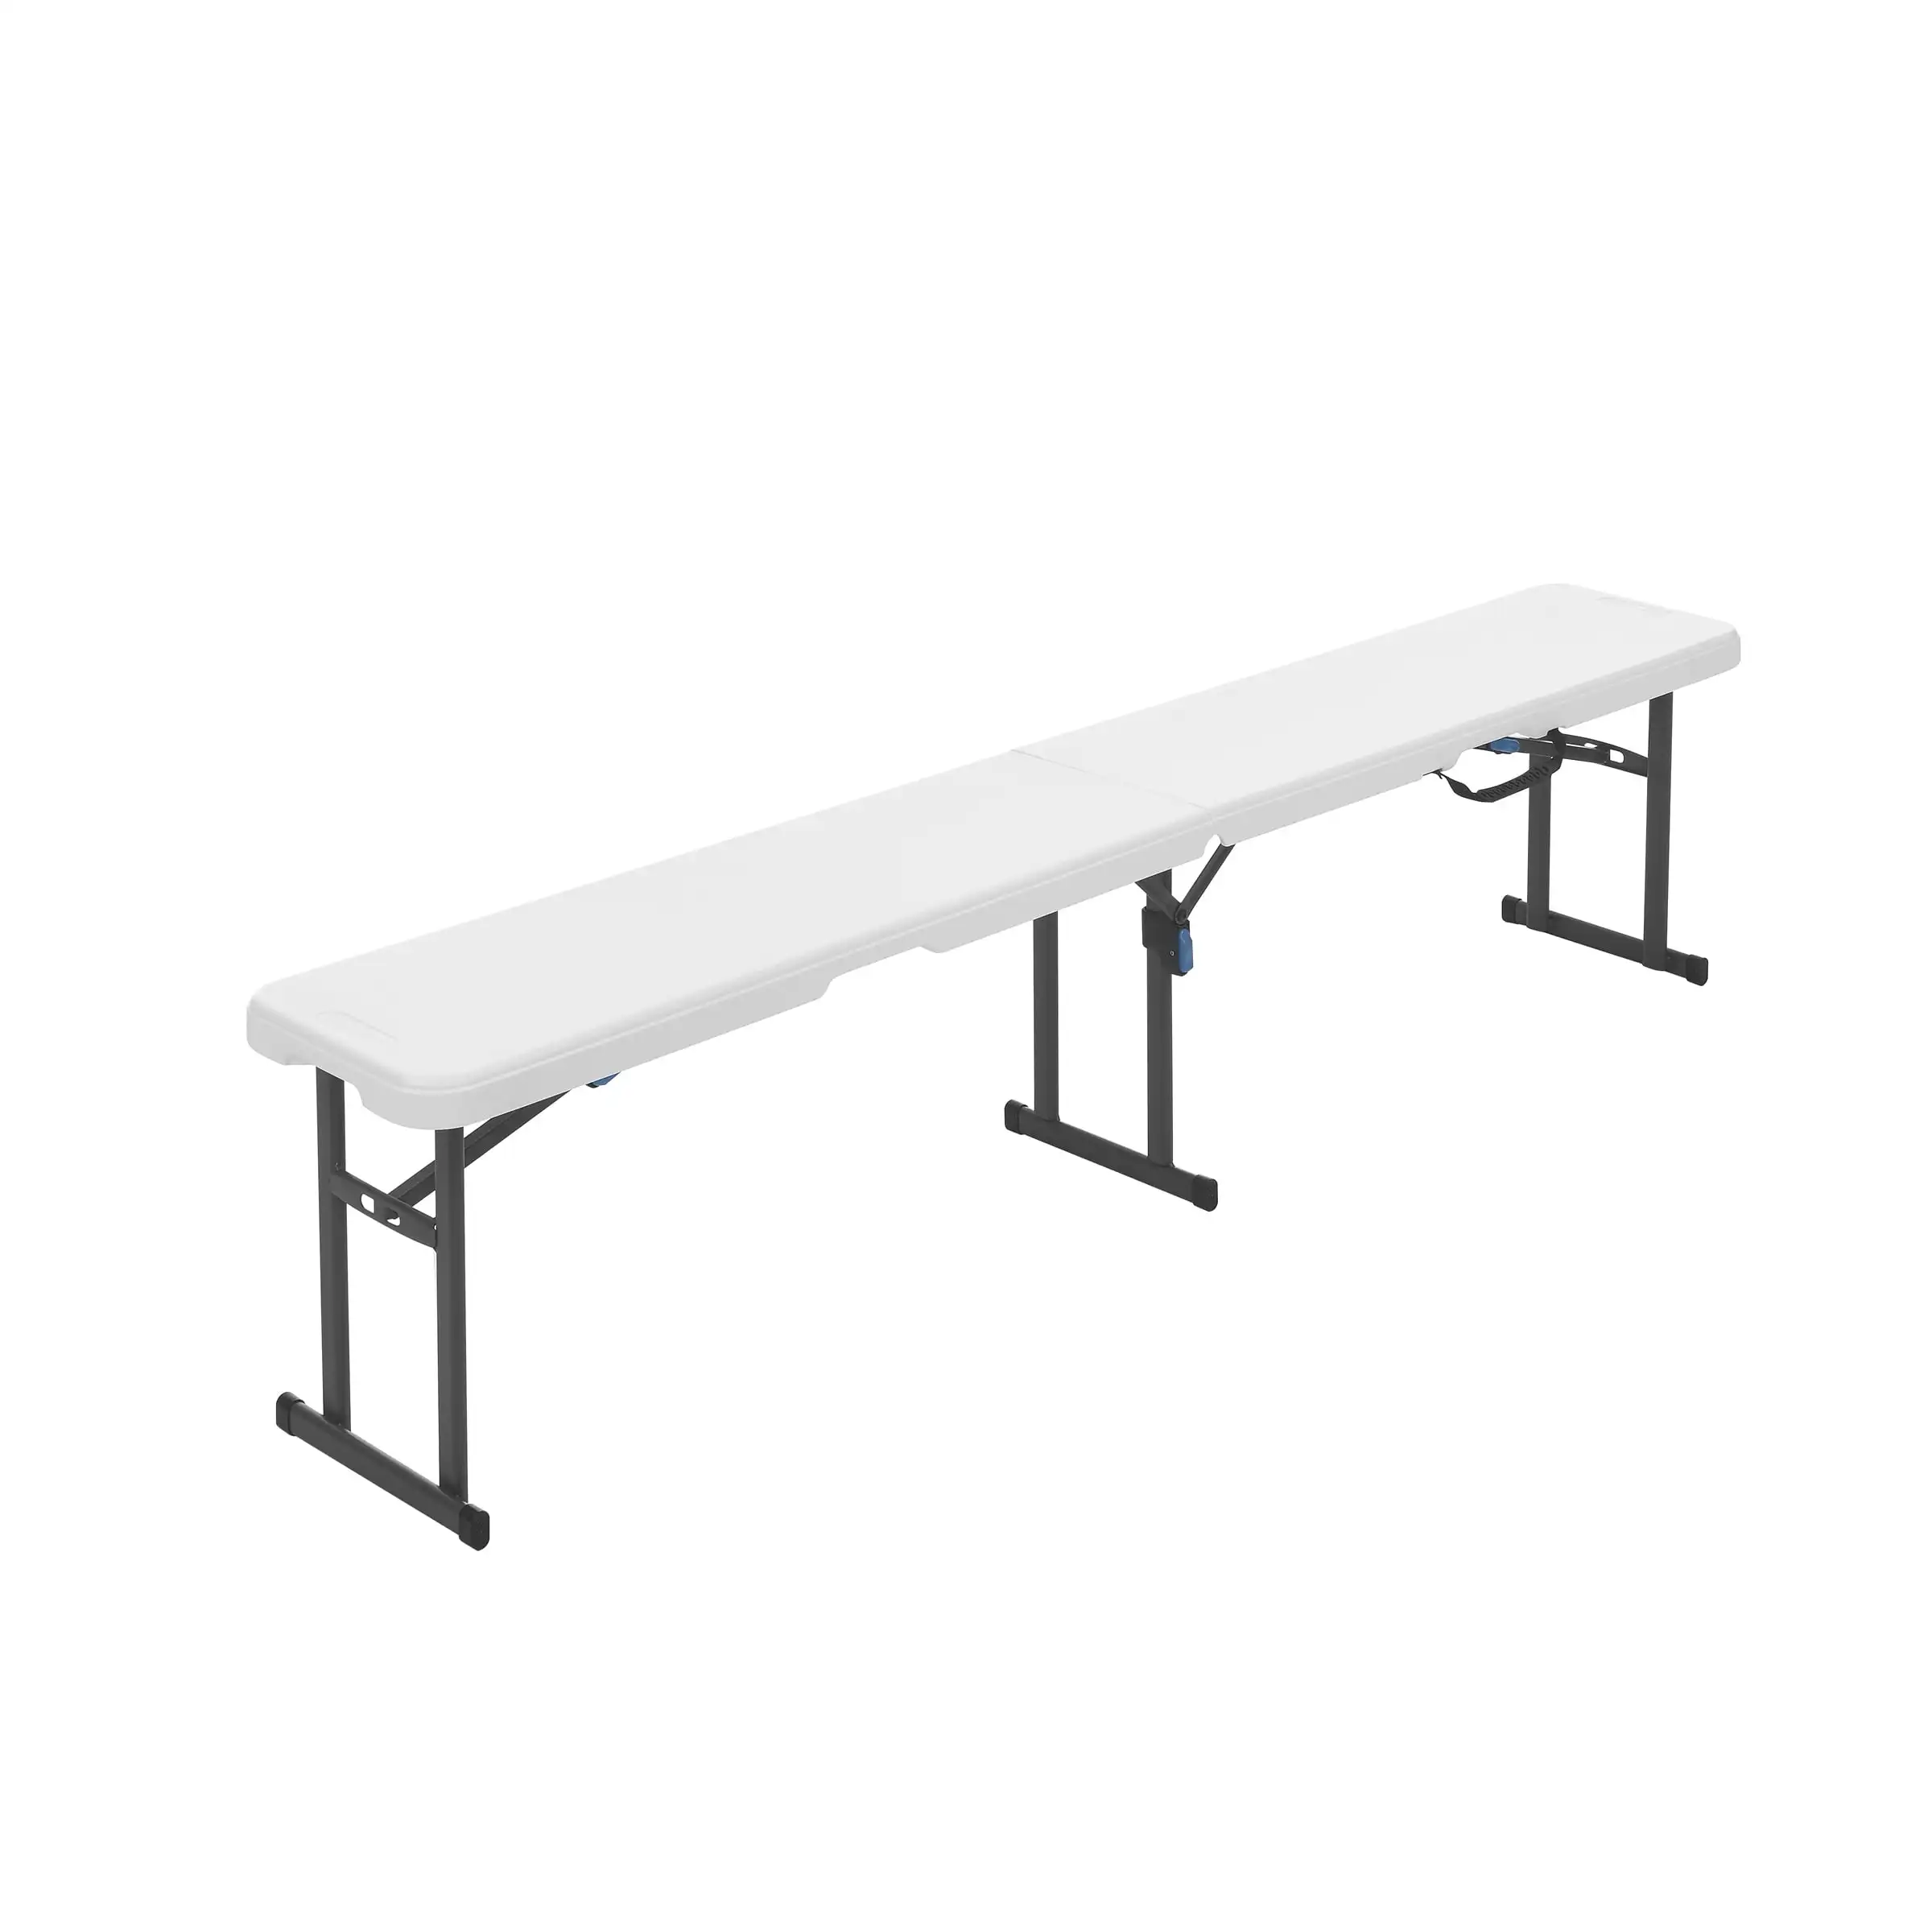 

Mainstays 6 Foot Fold-in-Half Bench, Steel Frame, Indoor Outdoor, Includes Carry Handle, White